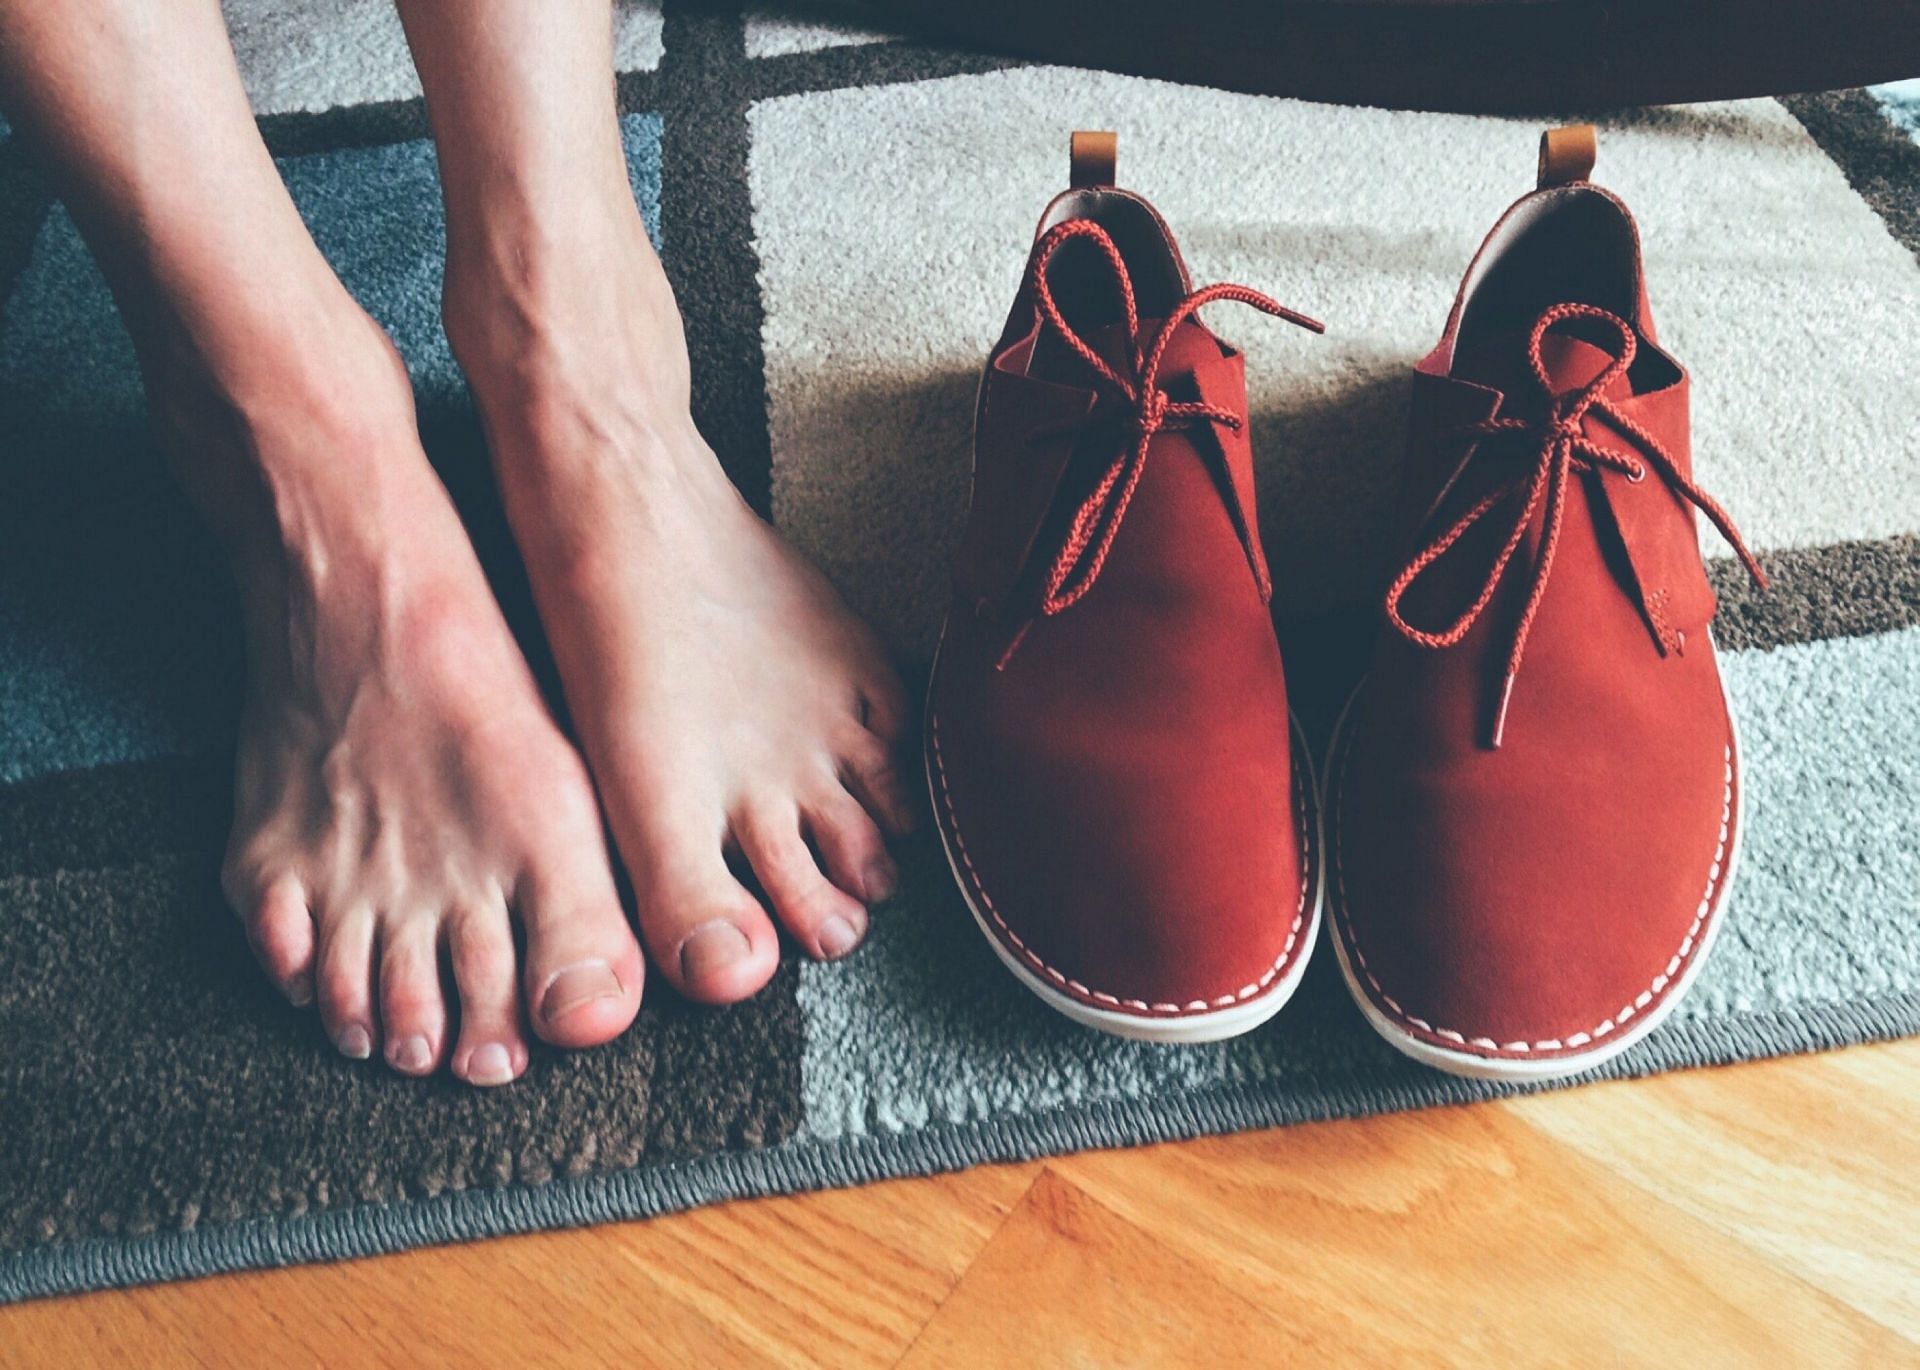 Plantar fasciitis is common in runners and people with flat feet, high arches or who are overweight (Image via Pexels/Pixabay)